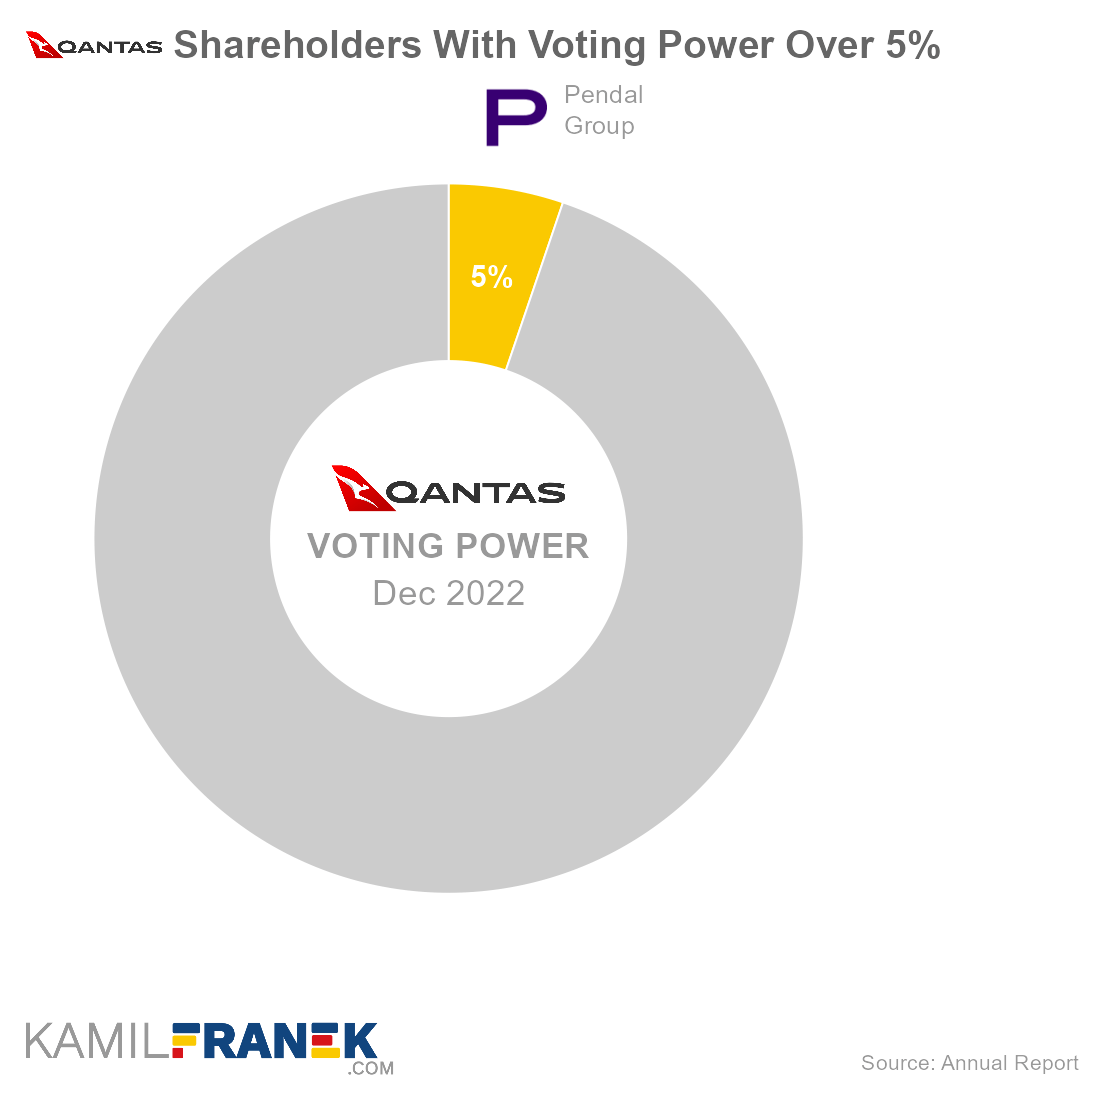 Qantas Airways largest shareholders by share ownership and vote control (donut chart)